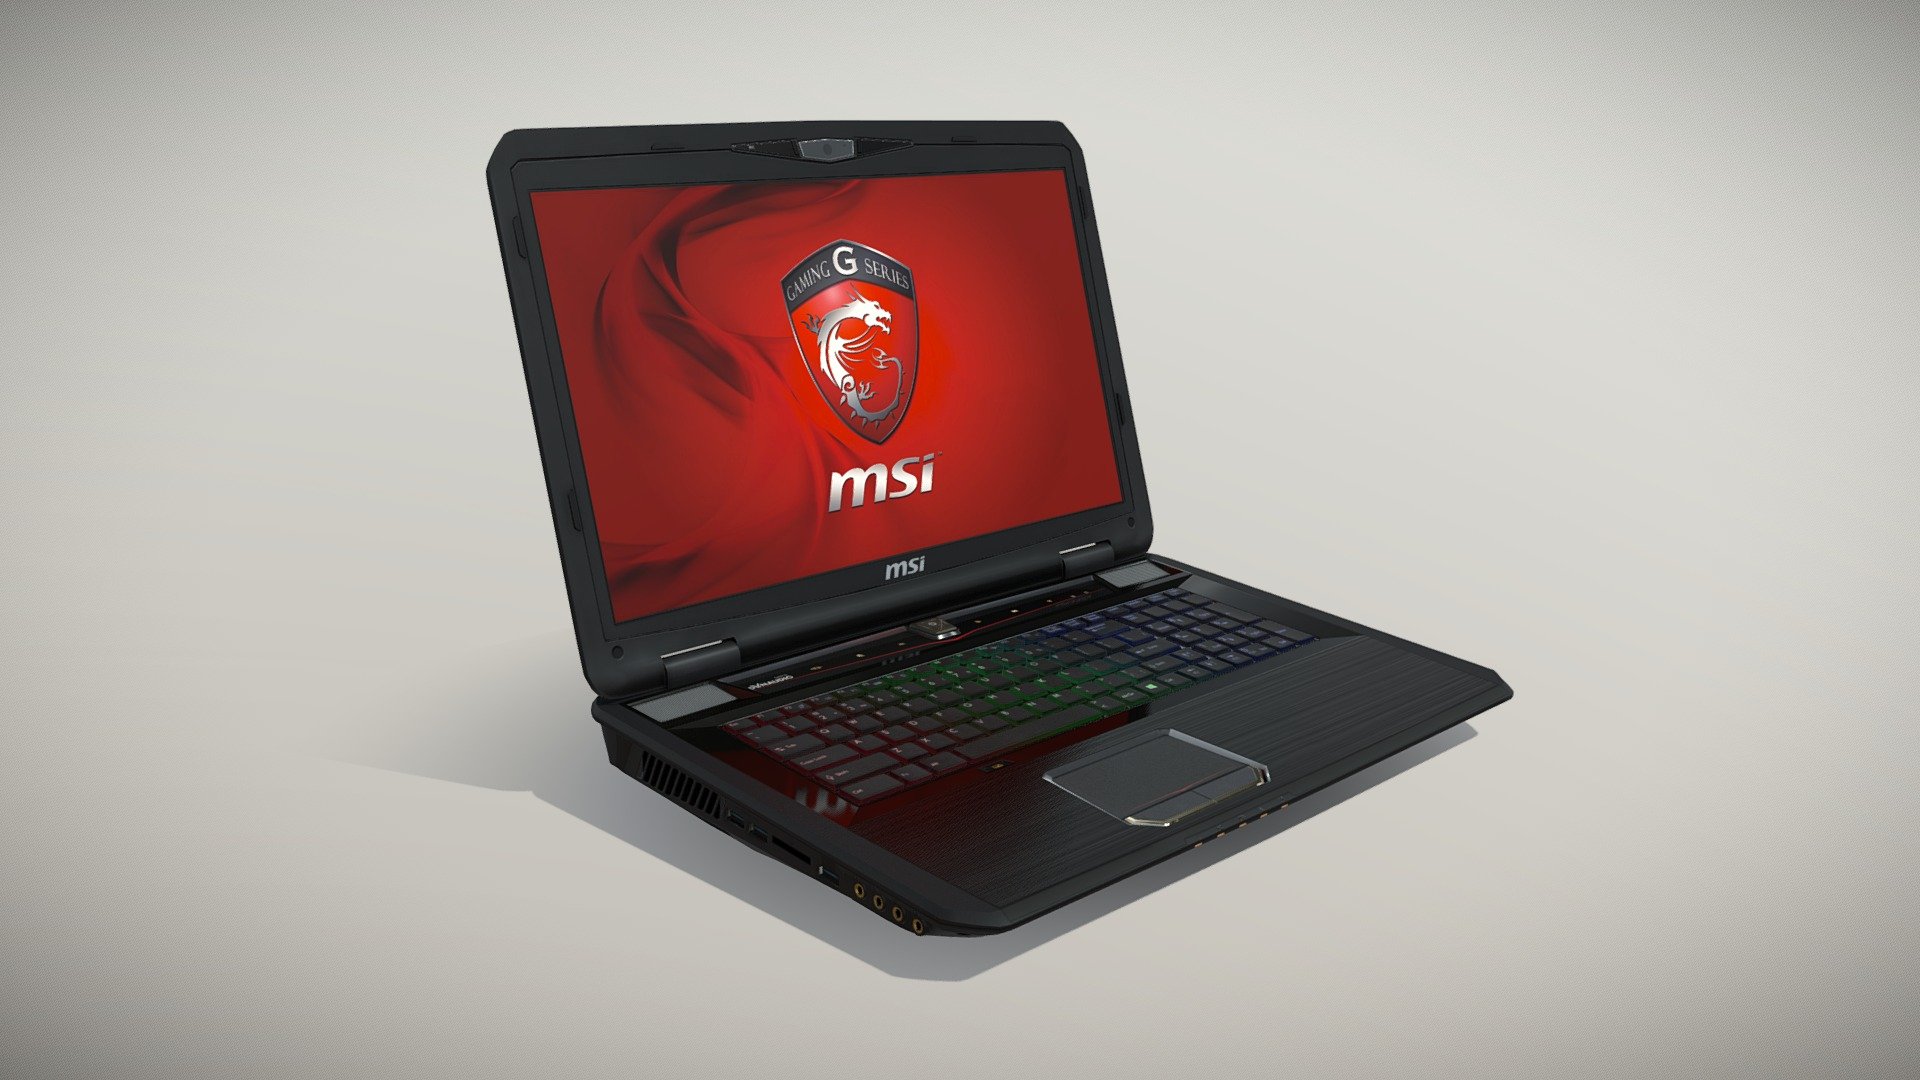 •   Let me present to you high-quality low-poly 3D model MSI GT70. Modeling was made with ortho-photos of real laptop that is why all details of design are recreated most authentically.

•    This model consists of two meshes, it is low-polygonal and it has only one material.

•   The total of the main textures is 5. Resolution of all textures is 4096 pixels square aspect ratio in .png format. Also there is original texture file .PSD format in separate archive.

•   Polygon count of the model is – 7452.

•   The model has correct dimensions in real-world scale. All parts grouped and named correctly.

•   To use the model in other 3D programs there are scenes saved in formats .fbx, .obj, .DAE, .max (2010 version).

Note: If you see some artifacts on the textures, it means compression works in the Viewer. We recommend setting HD quality for textures. But anyway, original textures have no artifacts 3d model